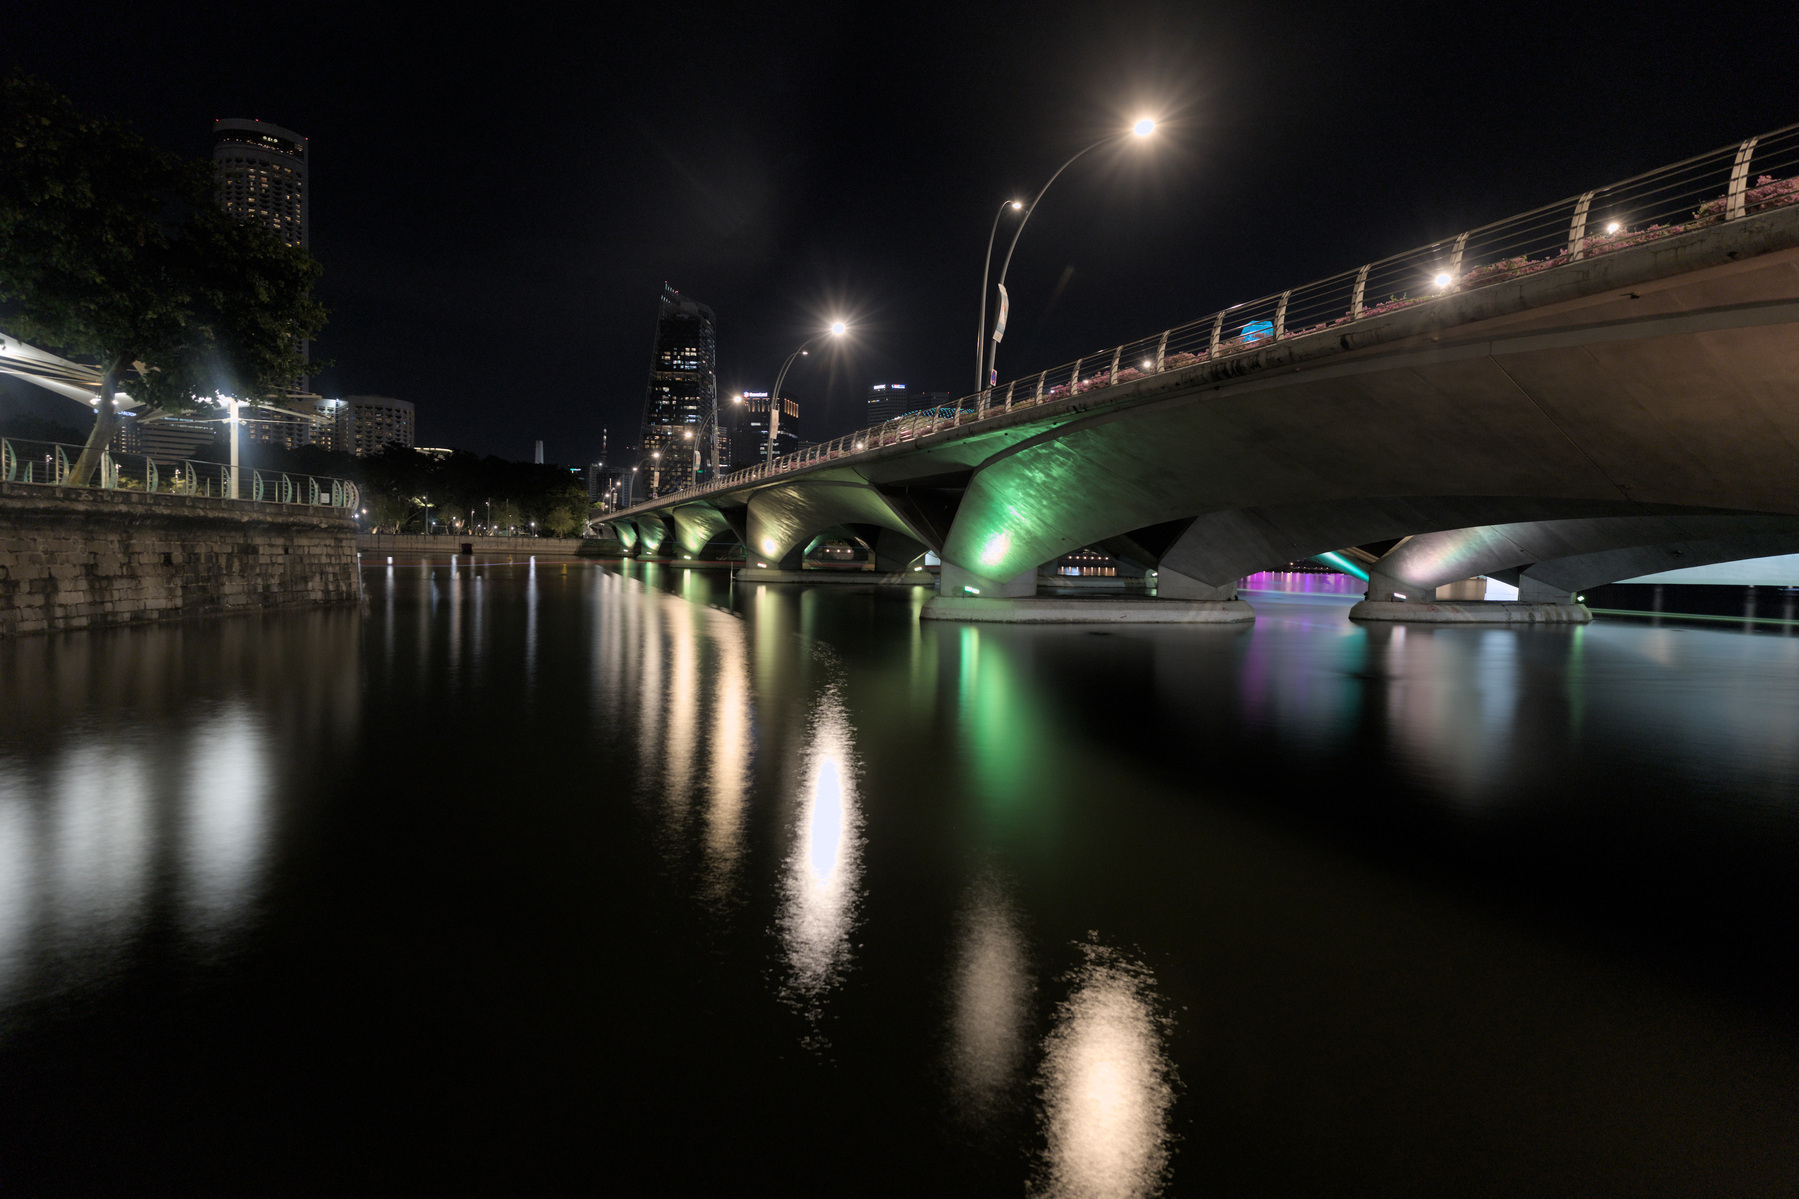 A bridge across the water of the Singapore river. The water is glassy from the longer exposure time.